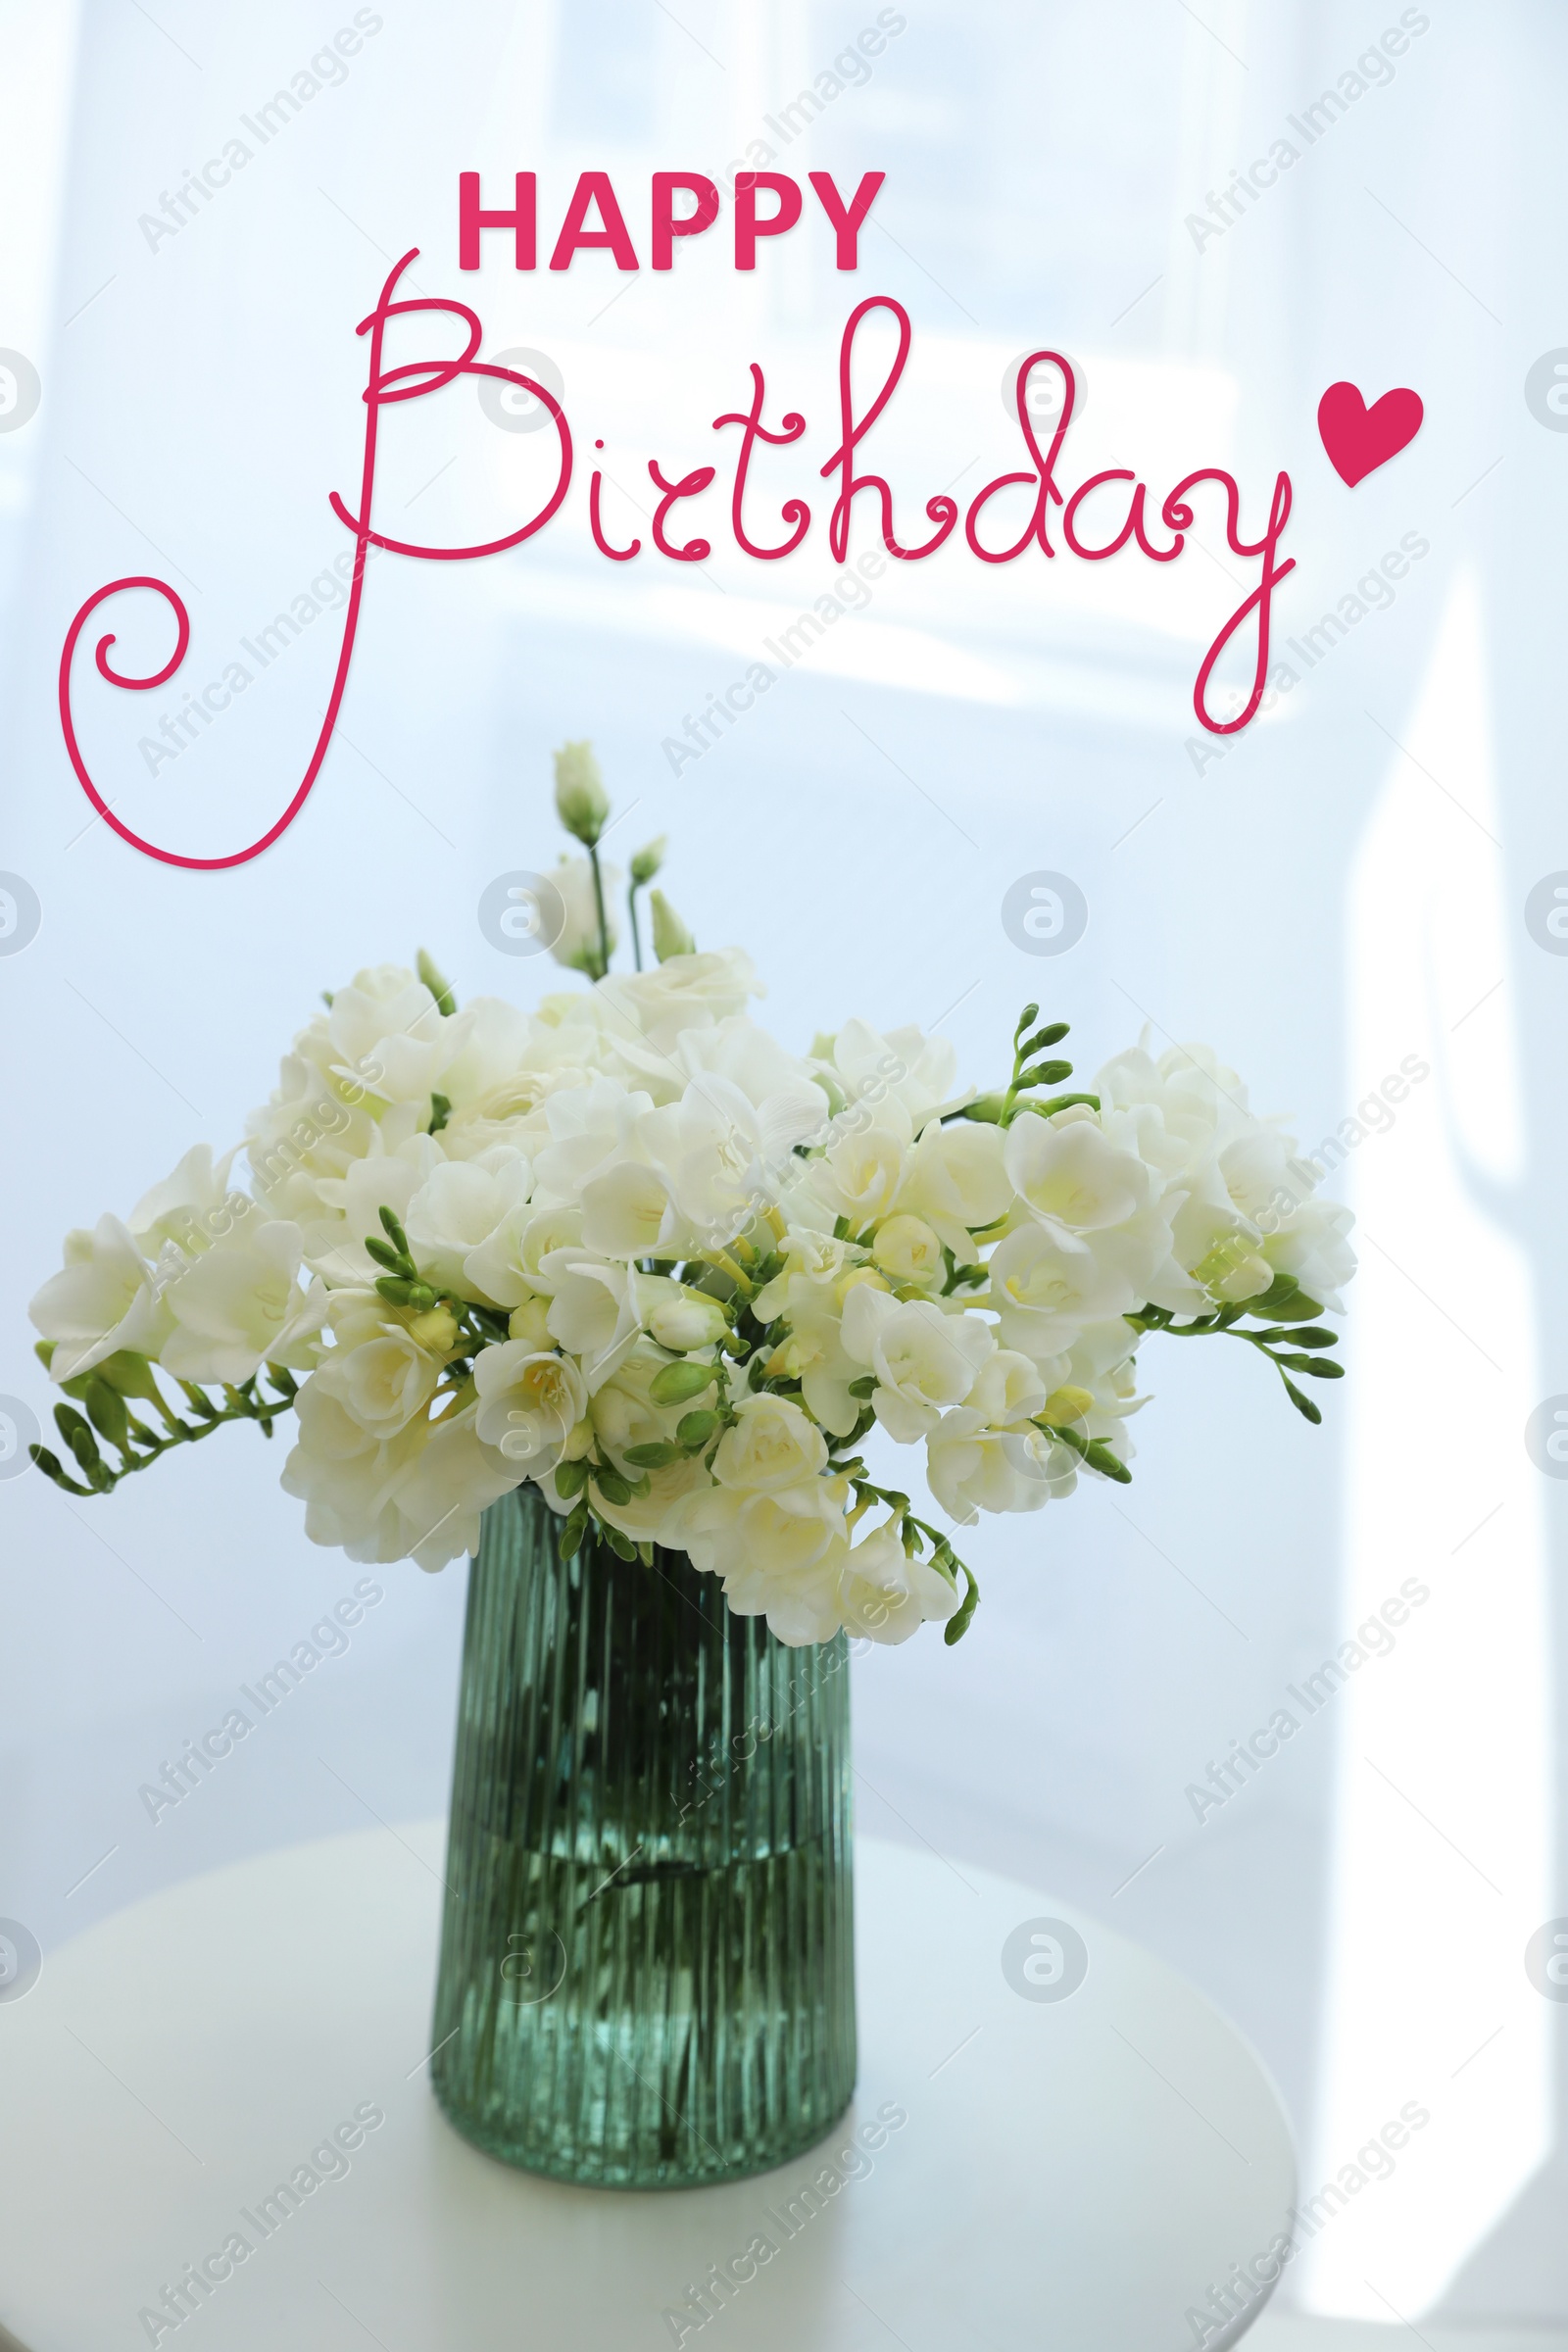 Image of Happy Birthday! Beautiful white freesia flowers in vase on table indoors